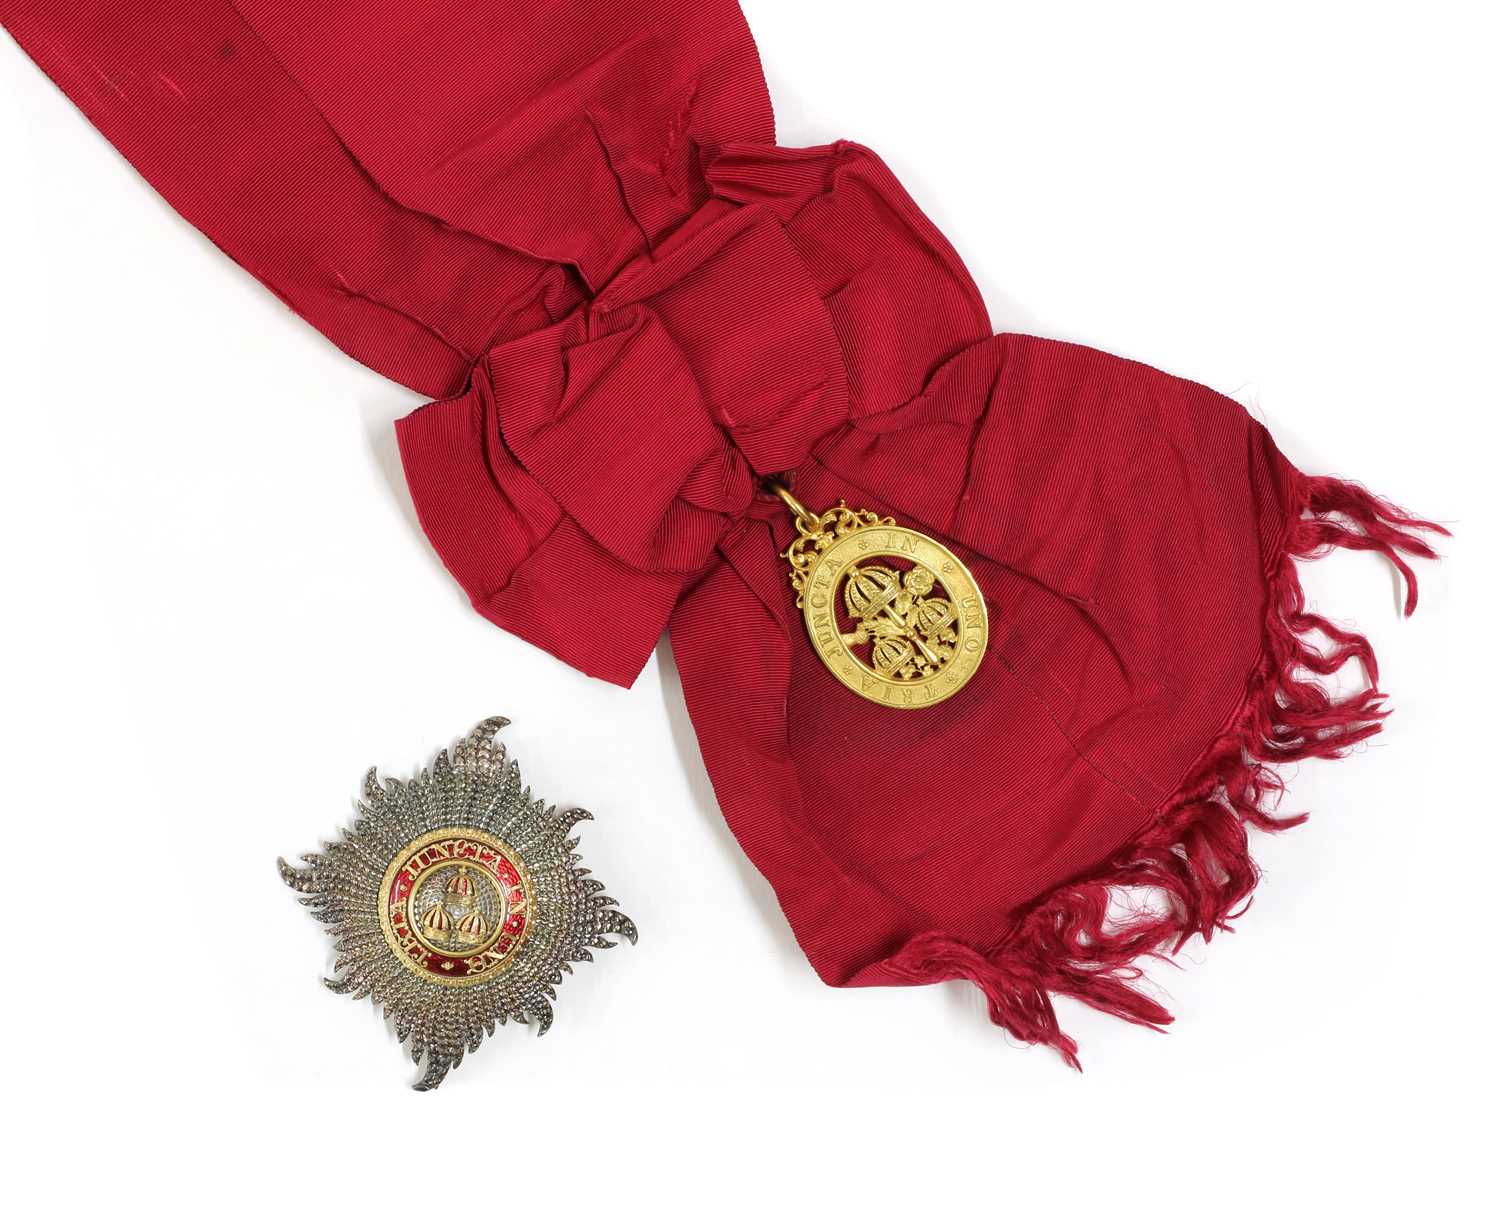 The Most Honourable Order of the Bath Civil Knight Grand Cross (GCB) insignia,